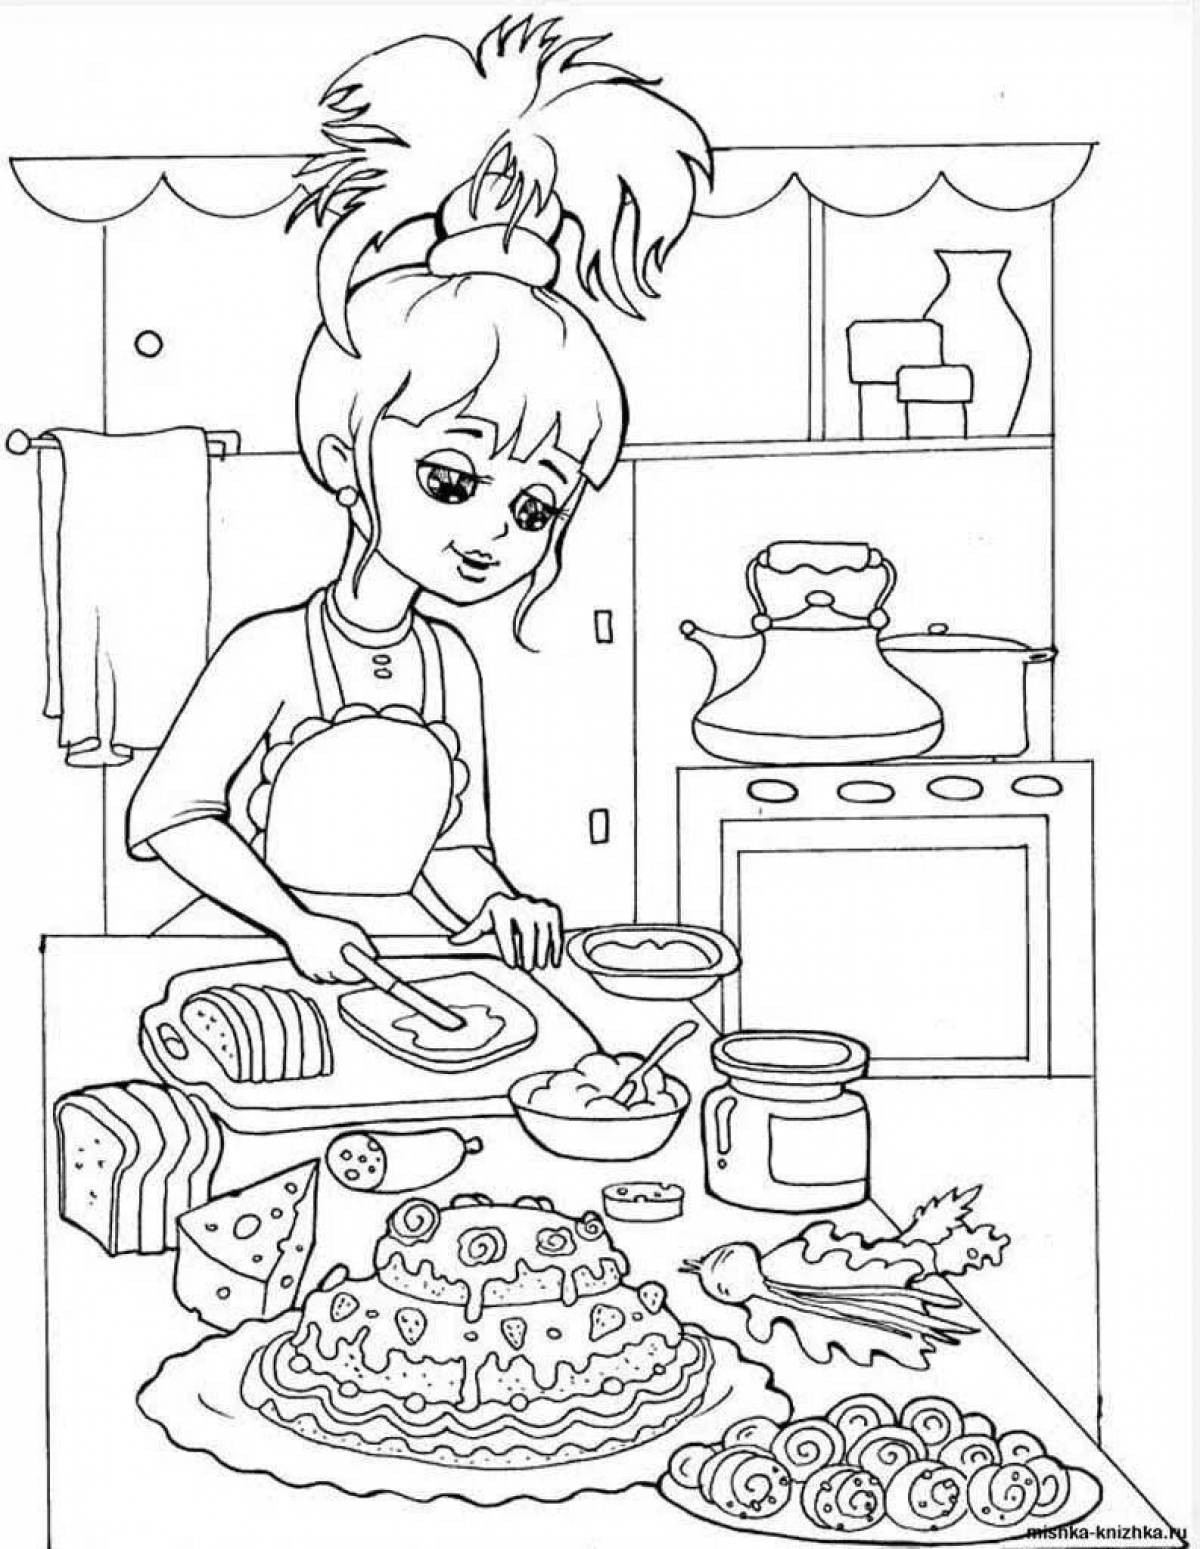 Coloring page dazzling mayan cuisine